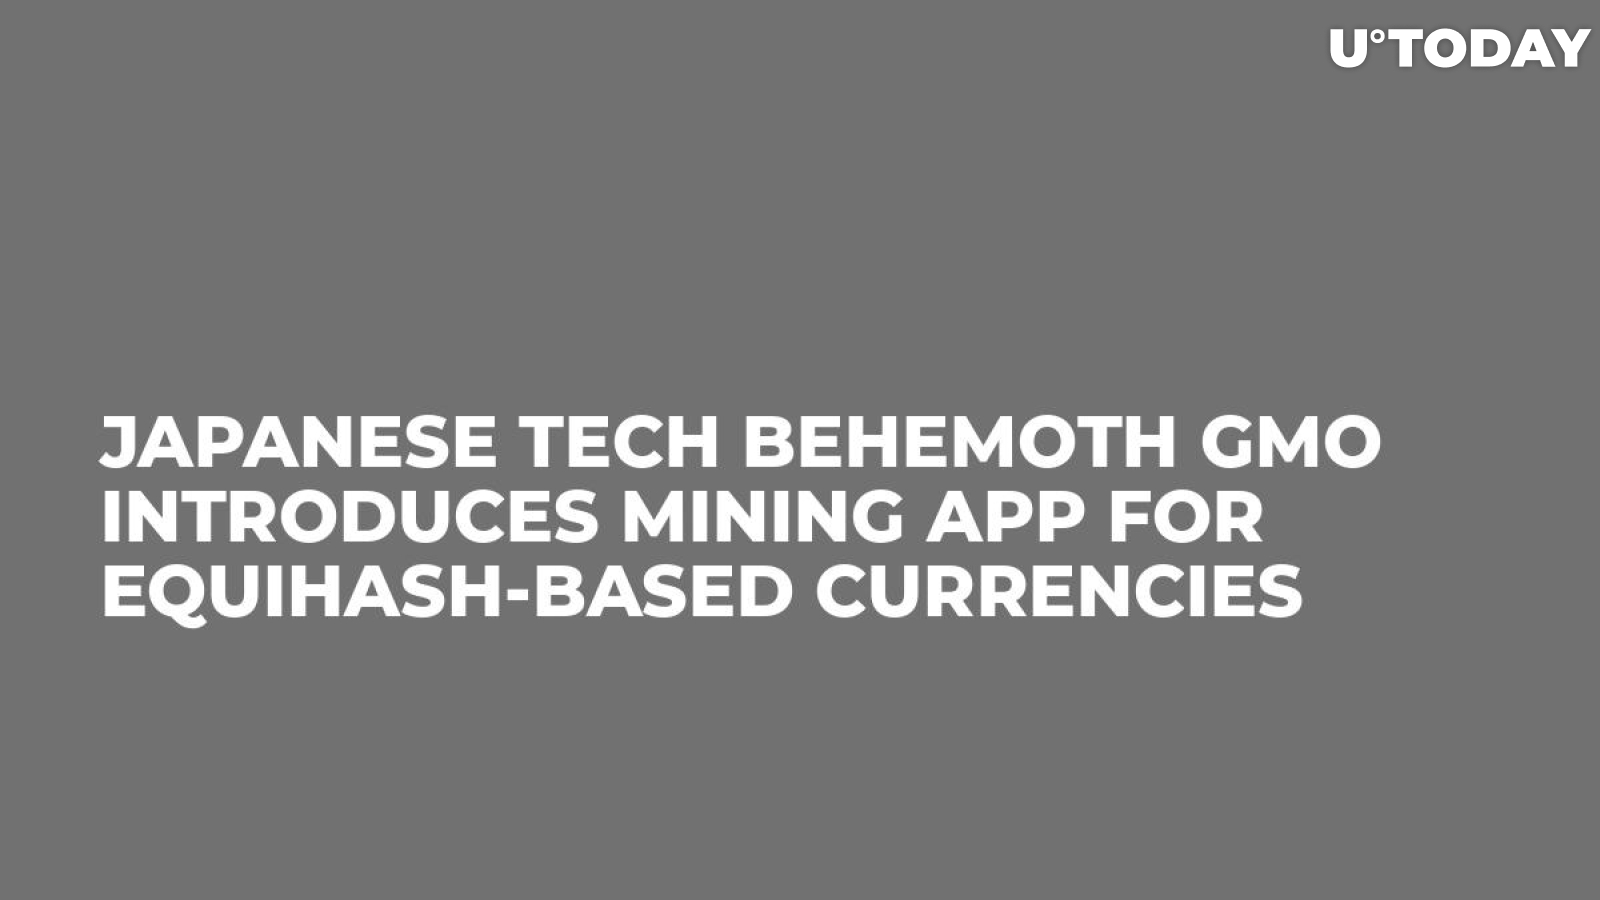 Japanese Tech Behemoth GMO Introduces Mining App For Equihash-Based Currencies